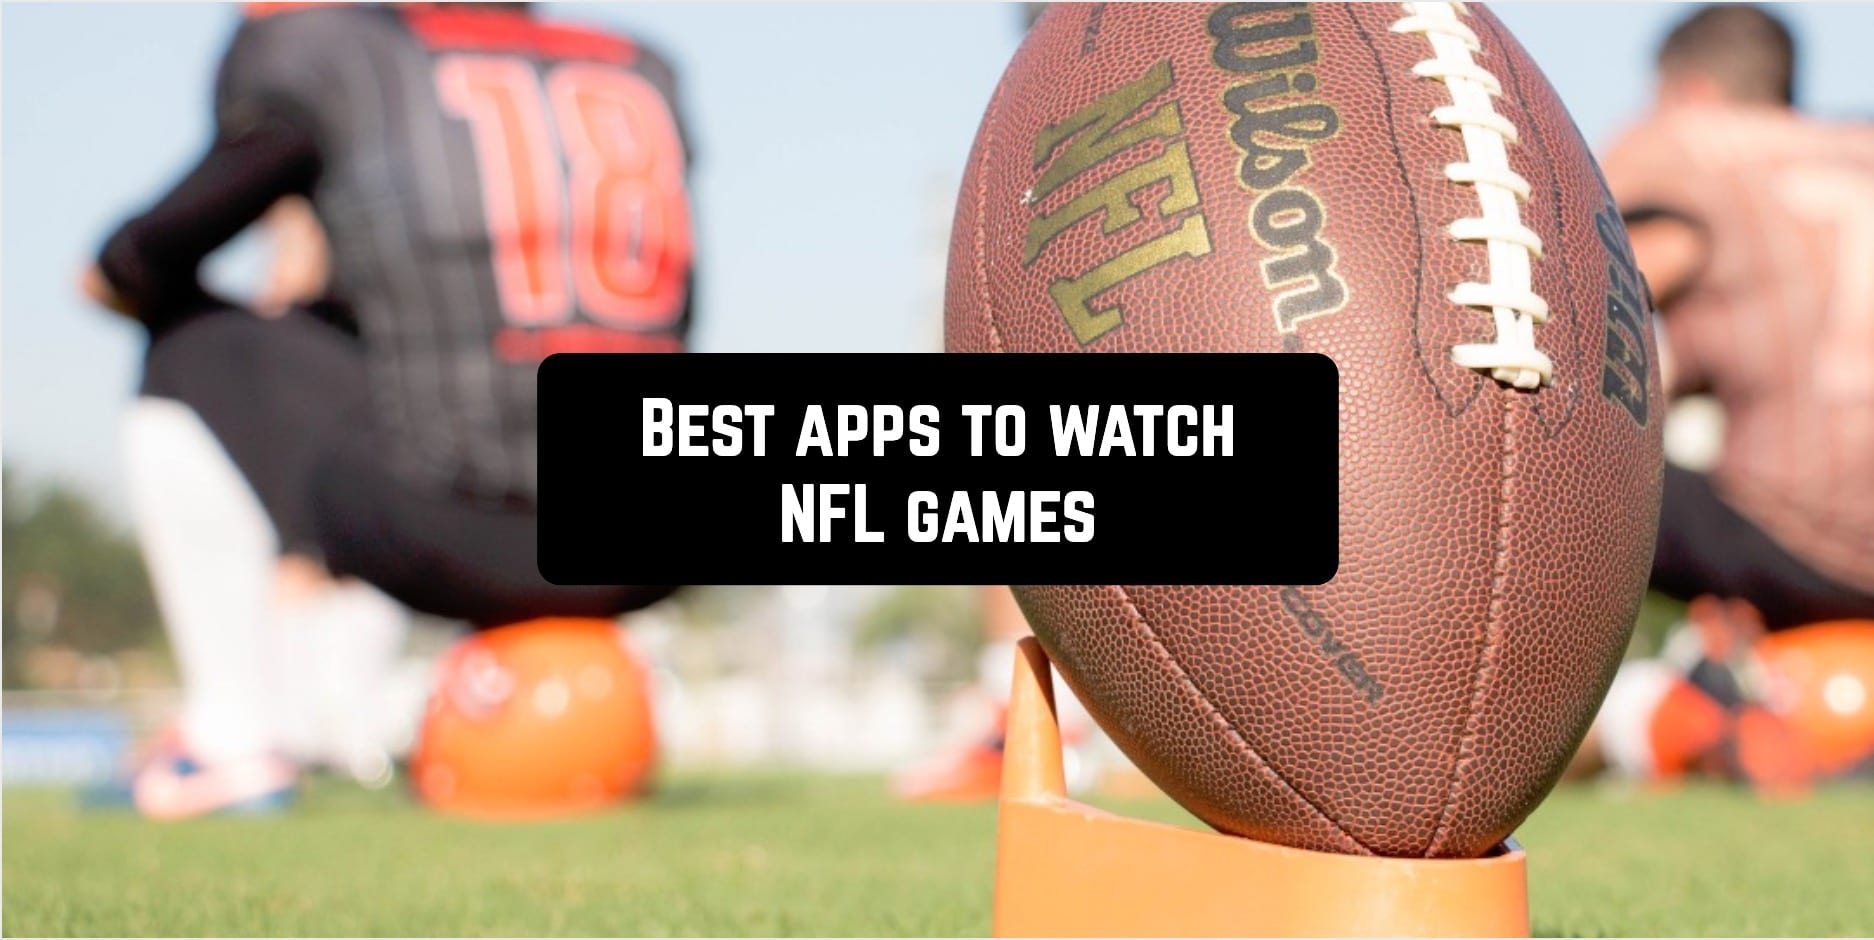 Best apps to watch NFL games